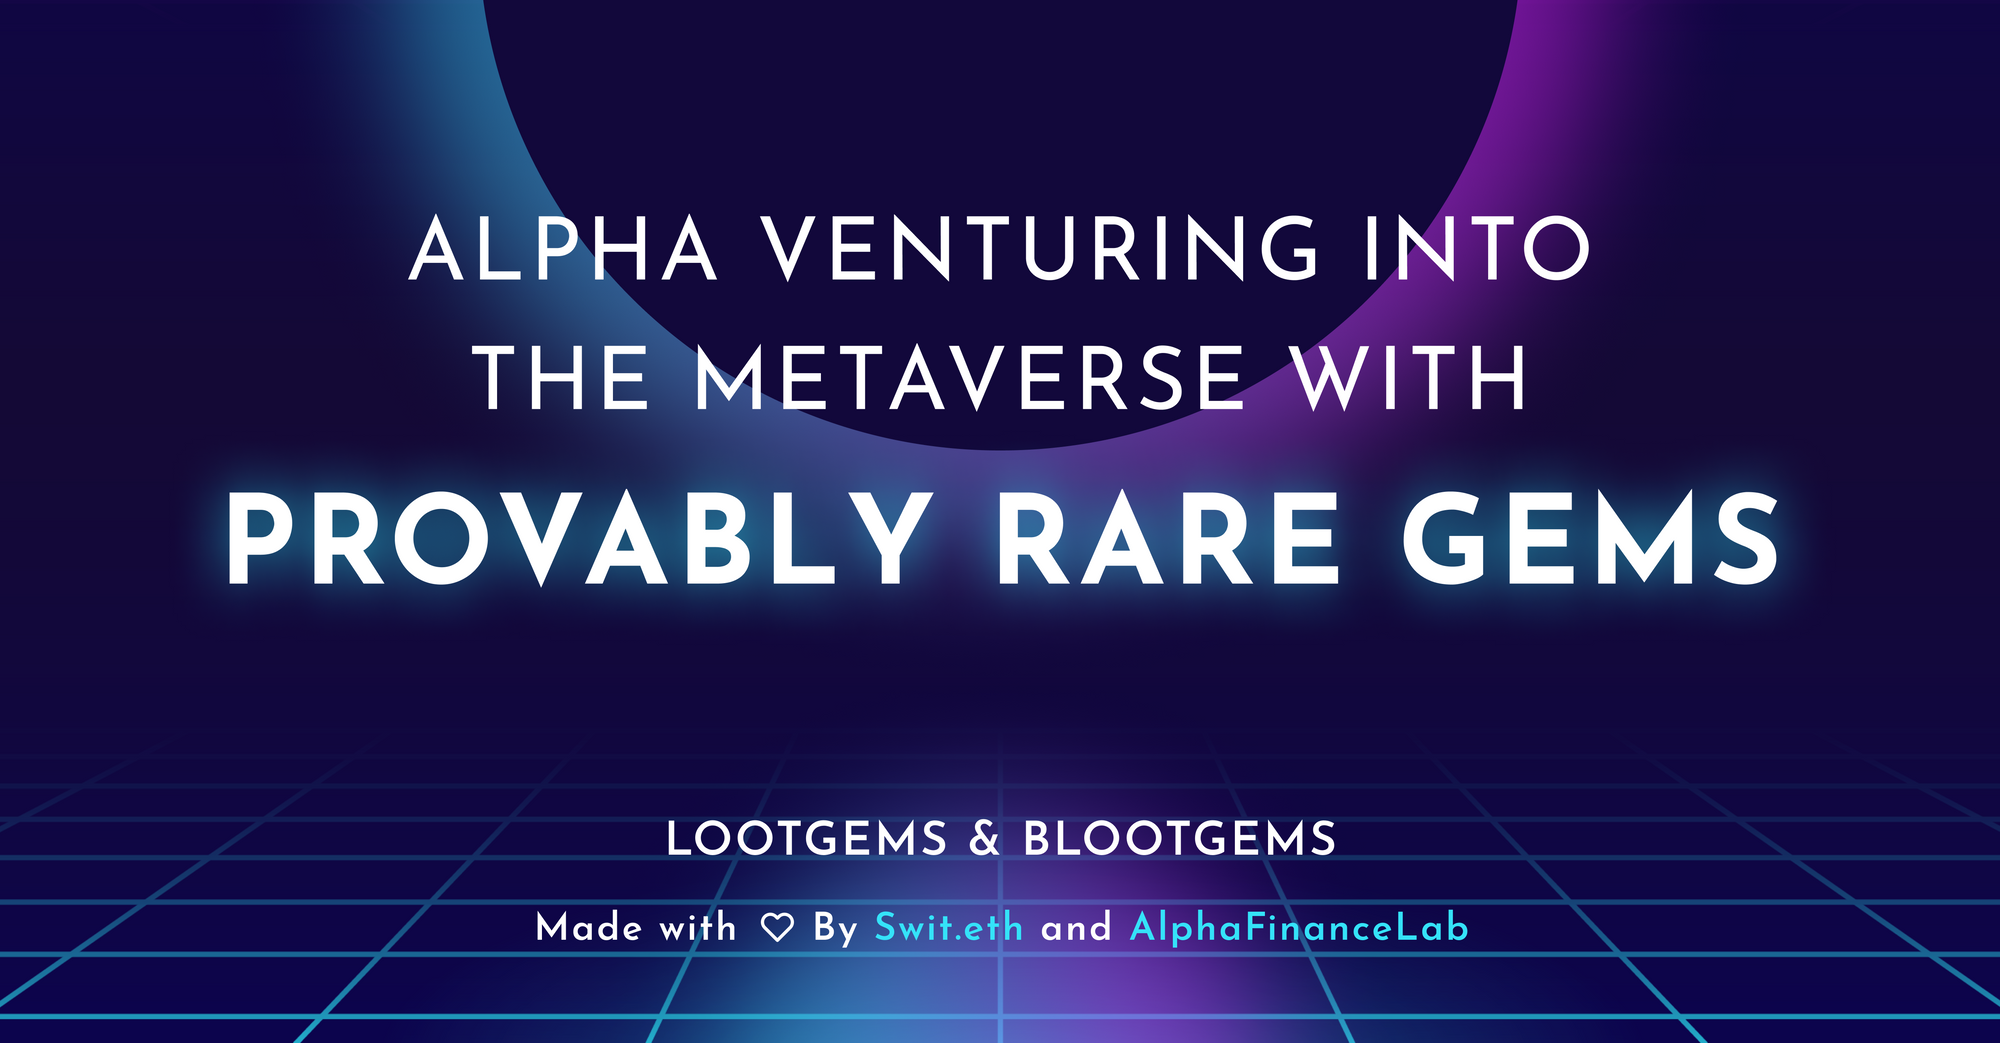 Alpha Venturing Into The Metaverse with Provably Rare Gems